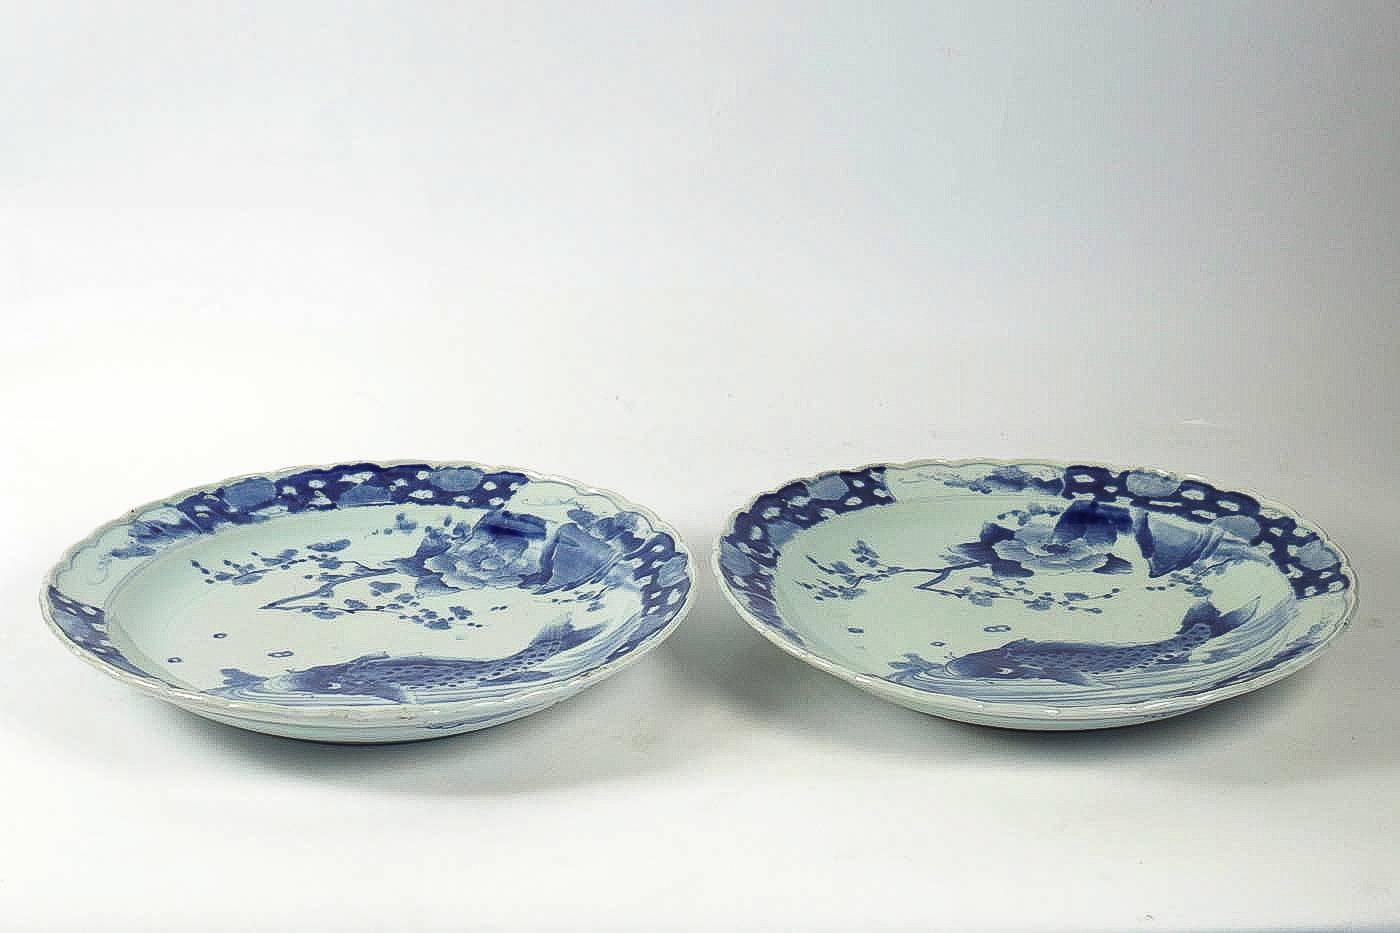 19th Century Japan, a Large Pair of Porcelain Dishes with Blue Koï Carps For Sale 7